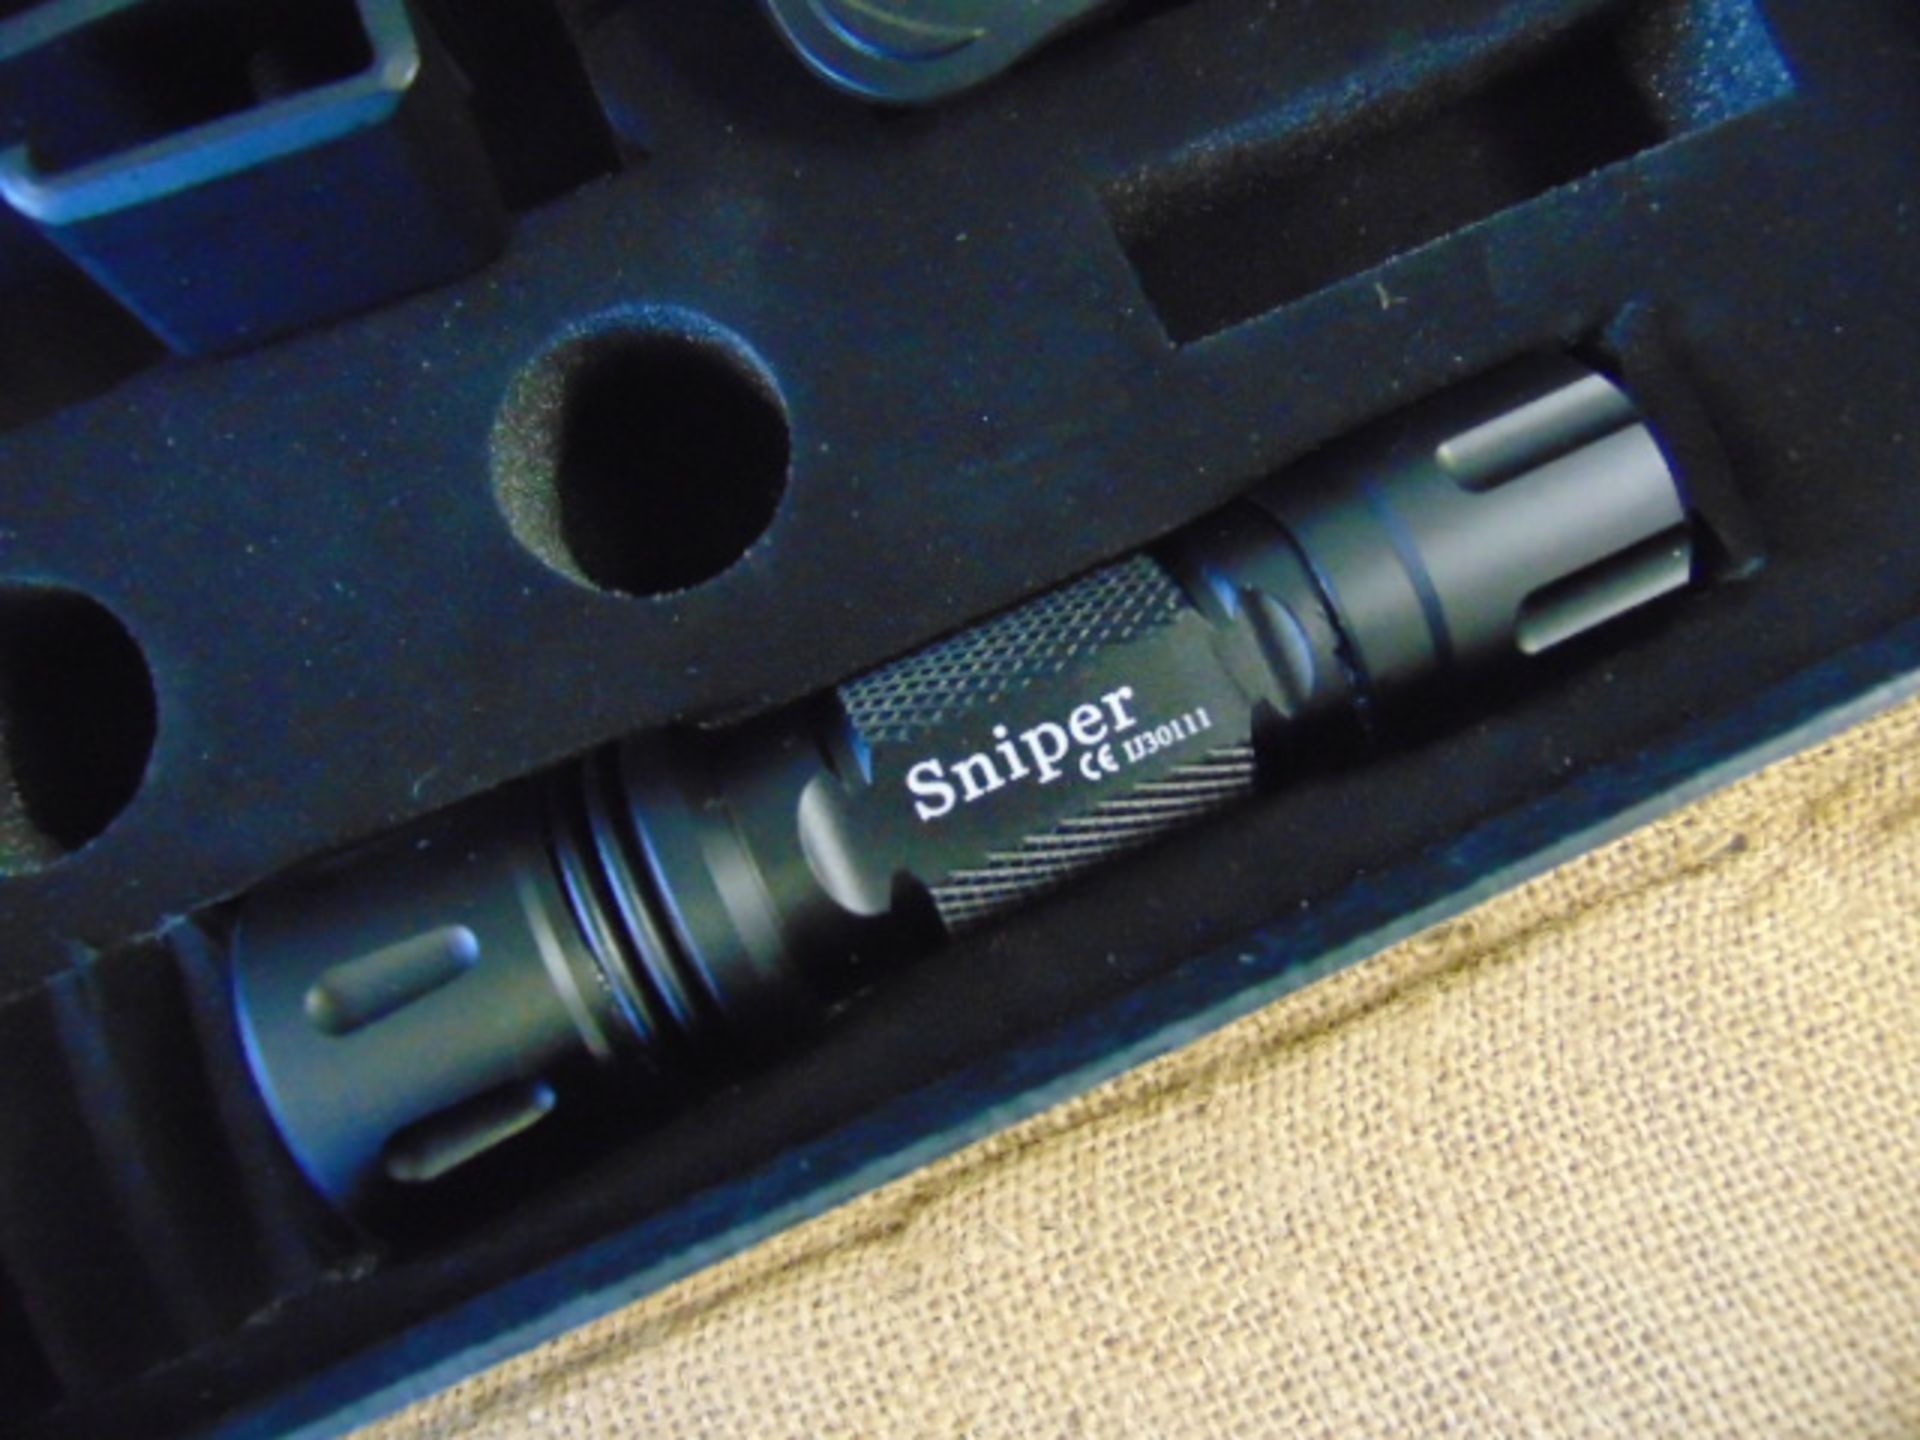 Wolf Eyes Sniper Tactical Flashlight - Image 3 of 10